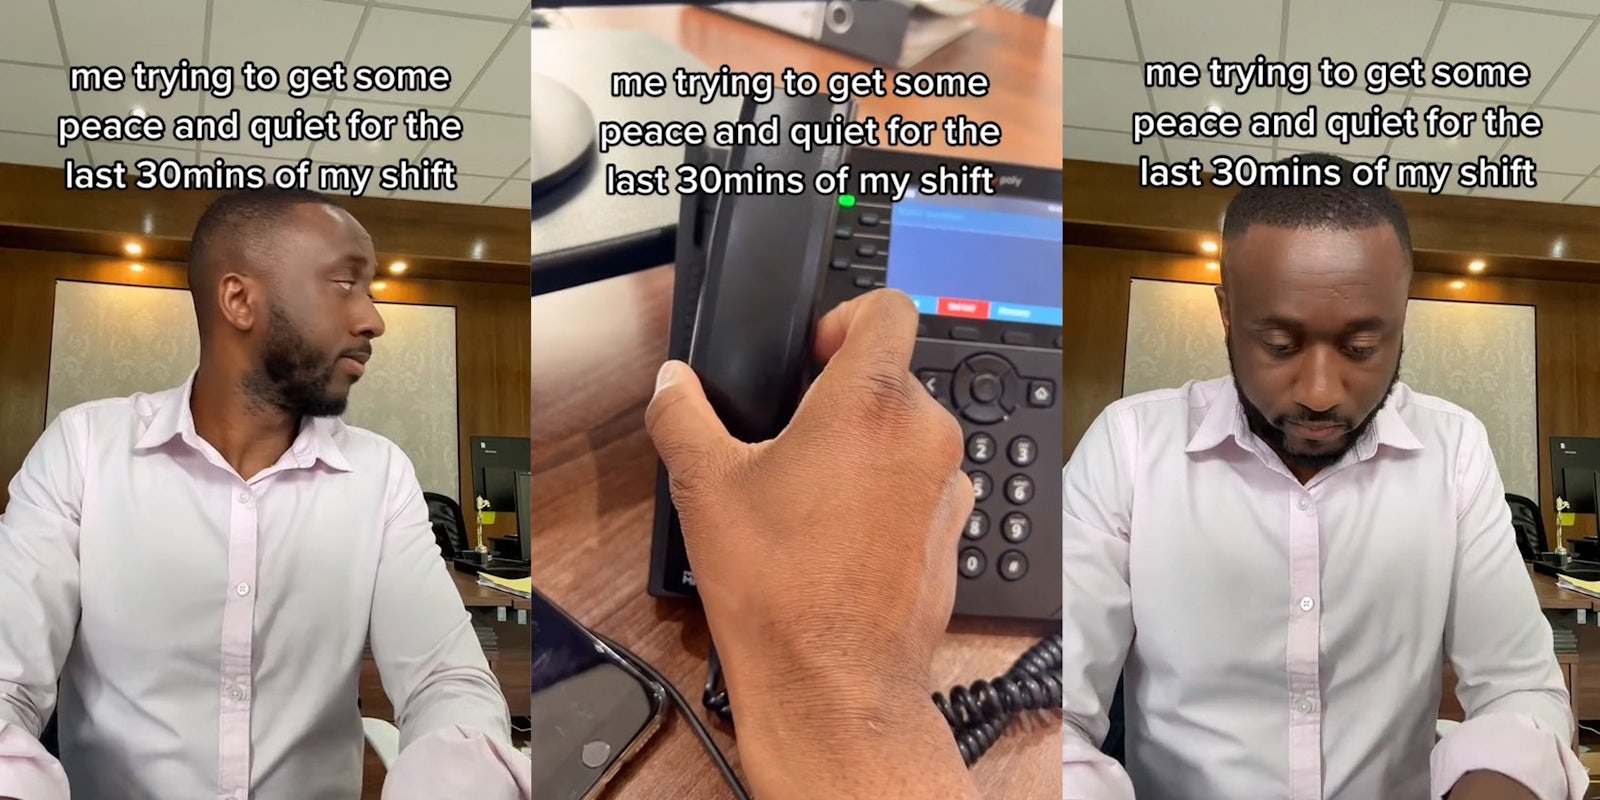 Worker reveals he unhooks phone 30 minutes before his shift ends so he gets some 'peace and quiet'